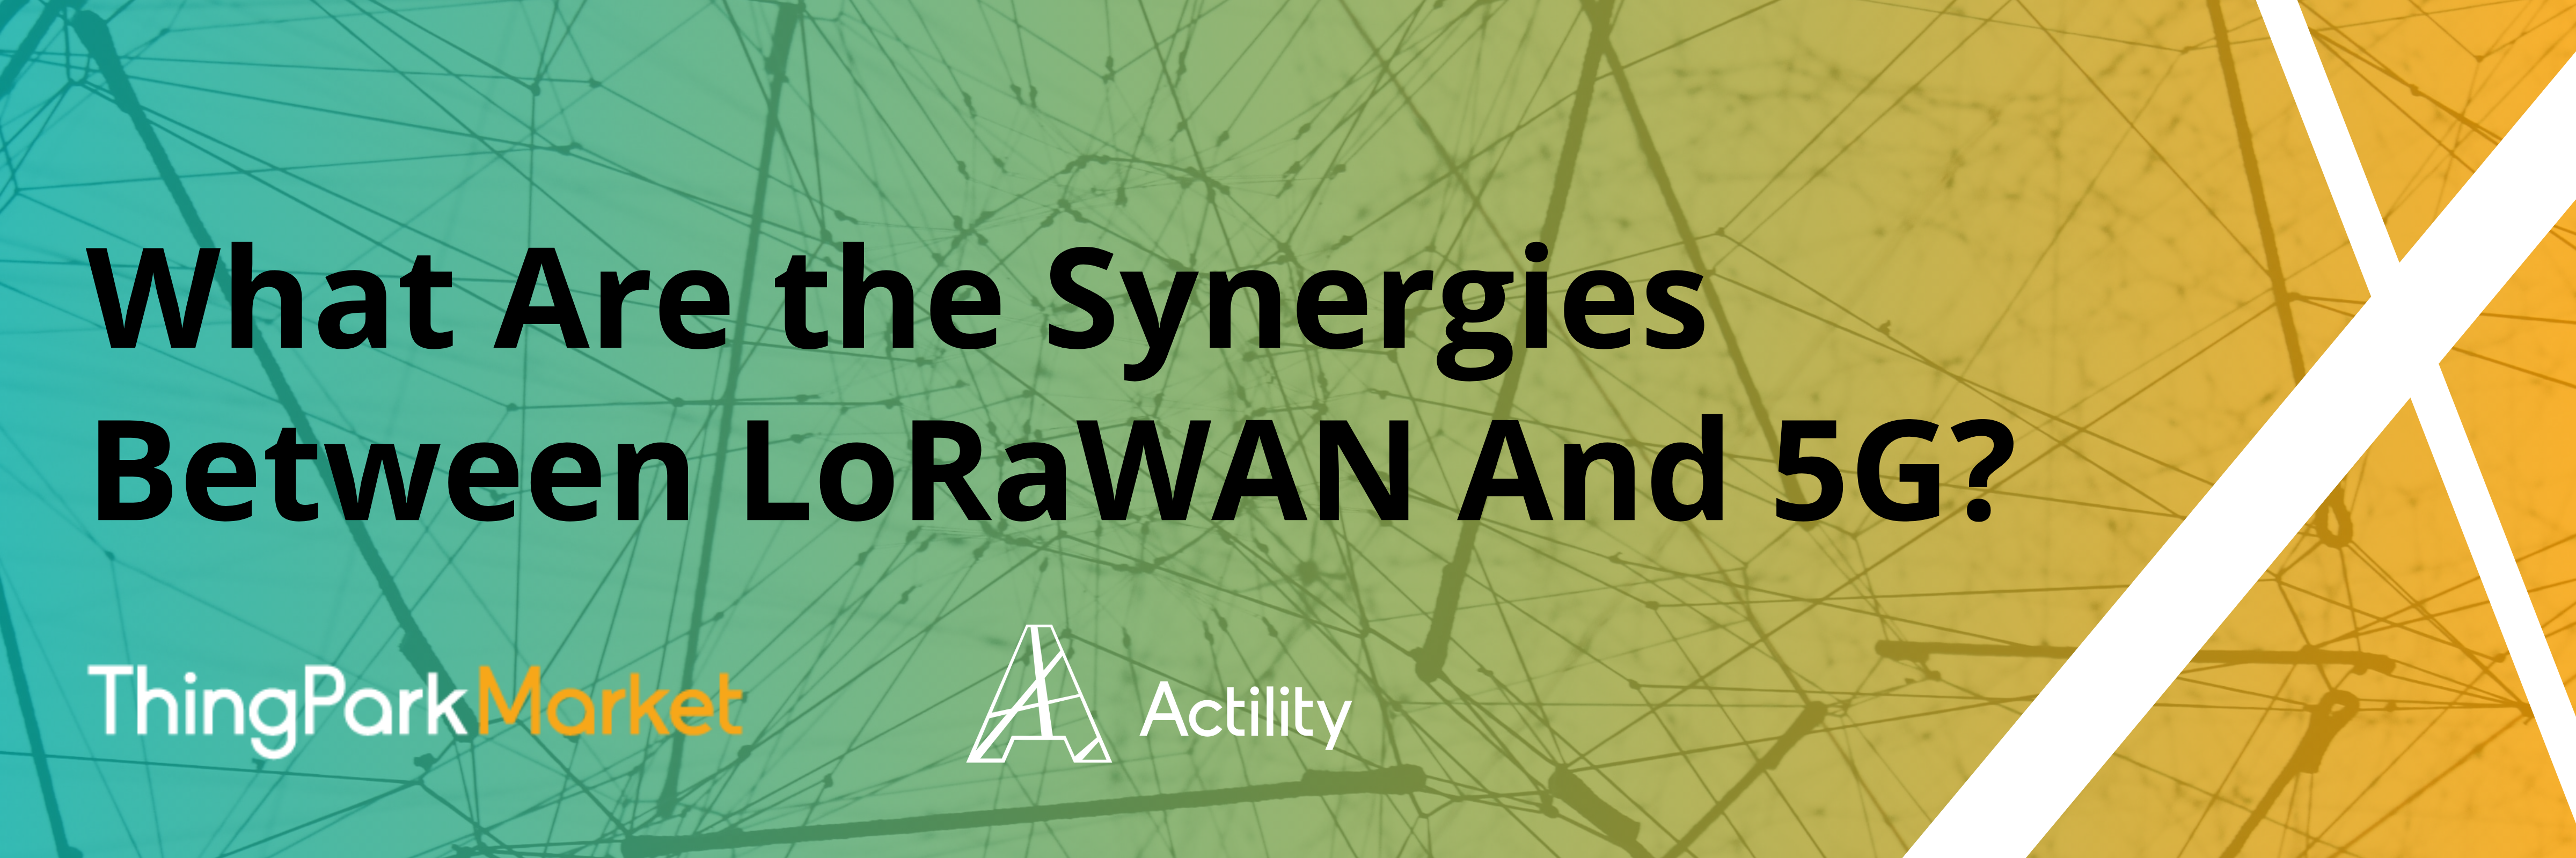 What Are the Synergies Between LoRaWAN And 5G?